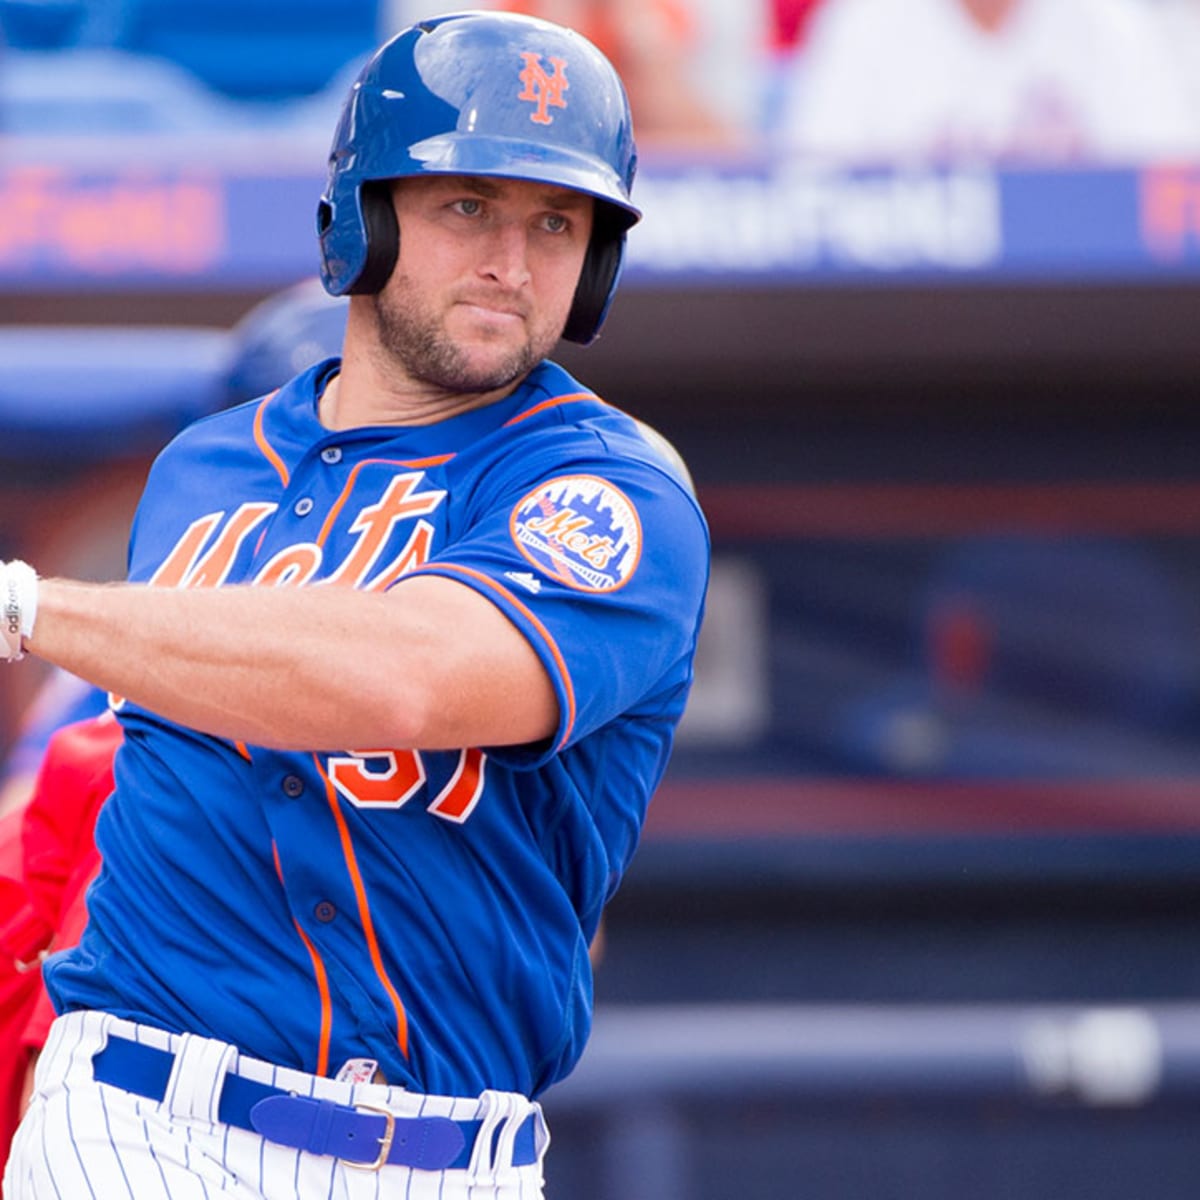 A real, honest look at Tim Tebow's baseball future